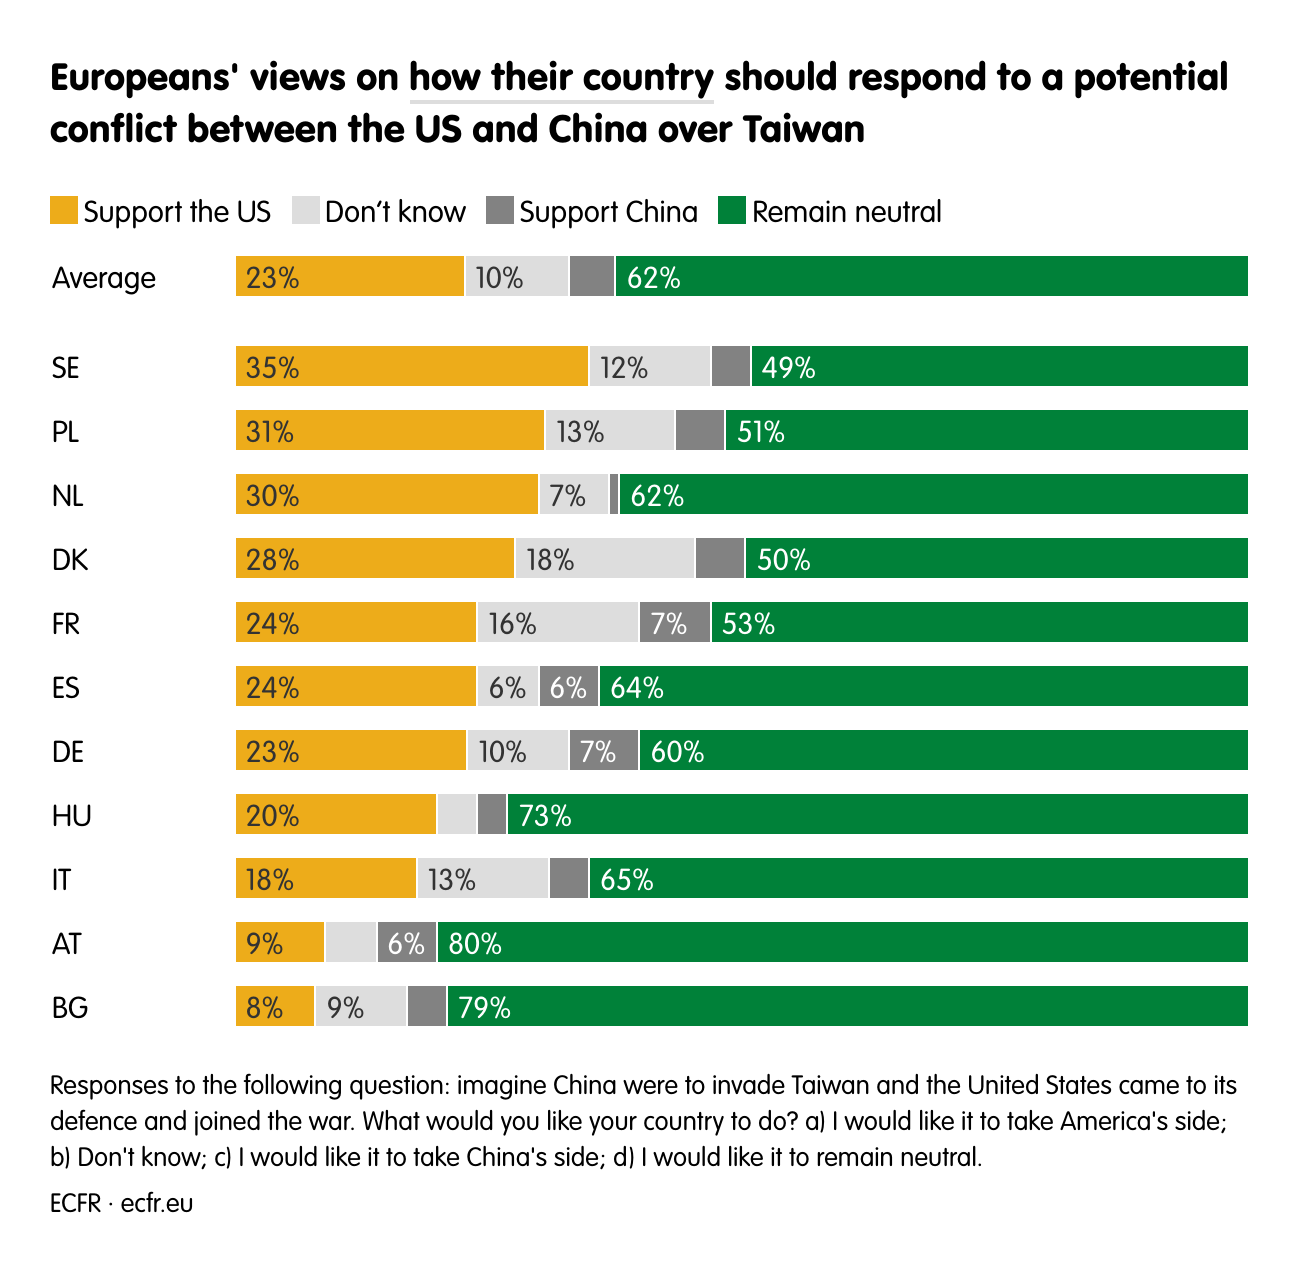 Europeans' views on how their country should respond to a potential conflict between the US and China over Taiwan